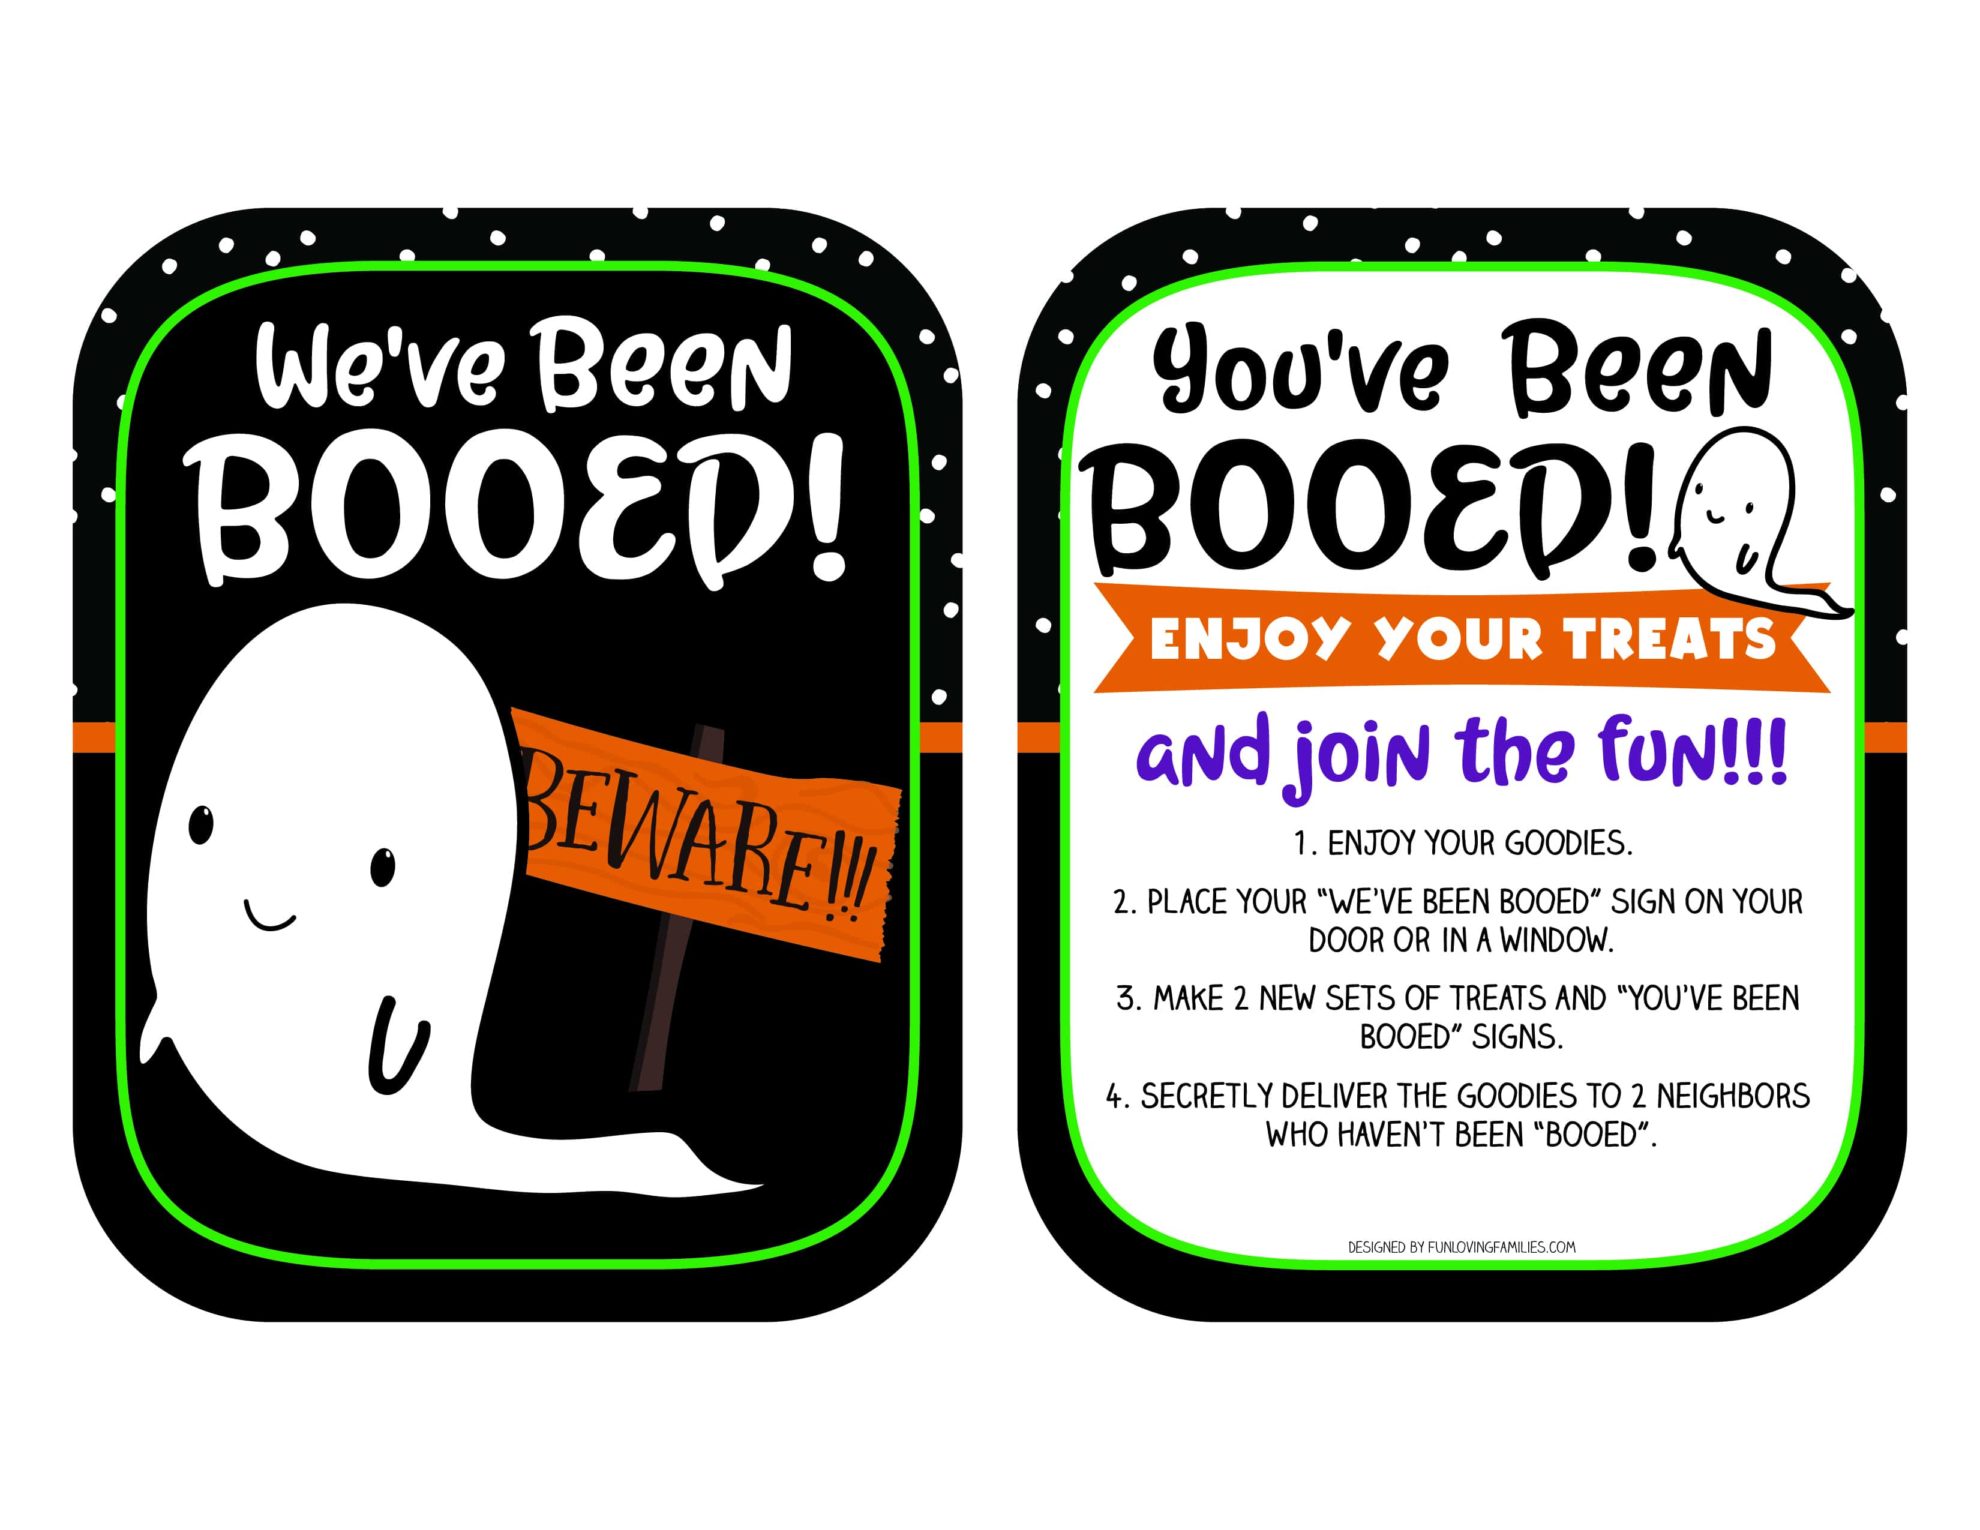 You've Been Booed Printable Signs Super Cute and Totally FREE! Fun